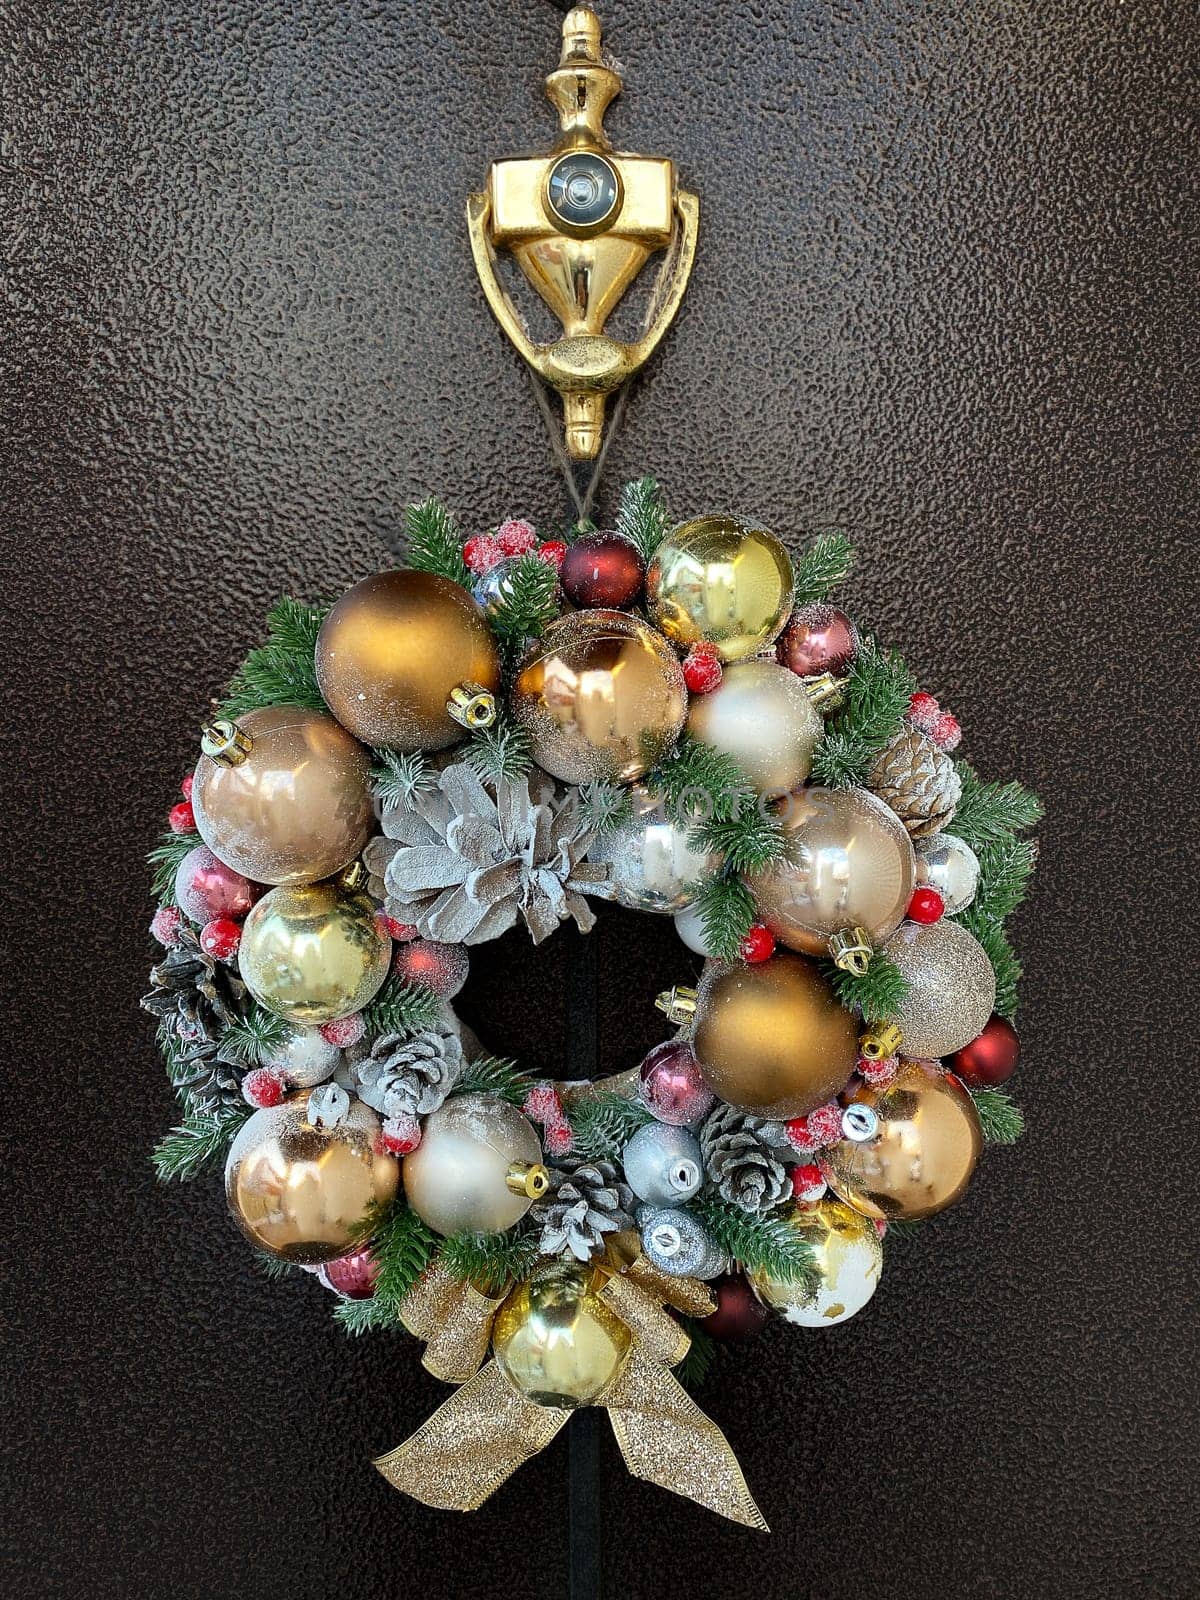 Luxurious Christmas decorative wreath, handmade with pine cones and golden balls, hangs on the dark front door of the house.